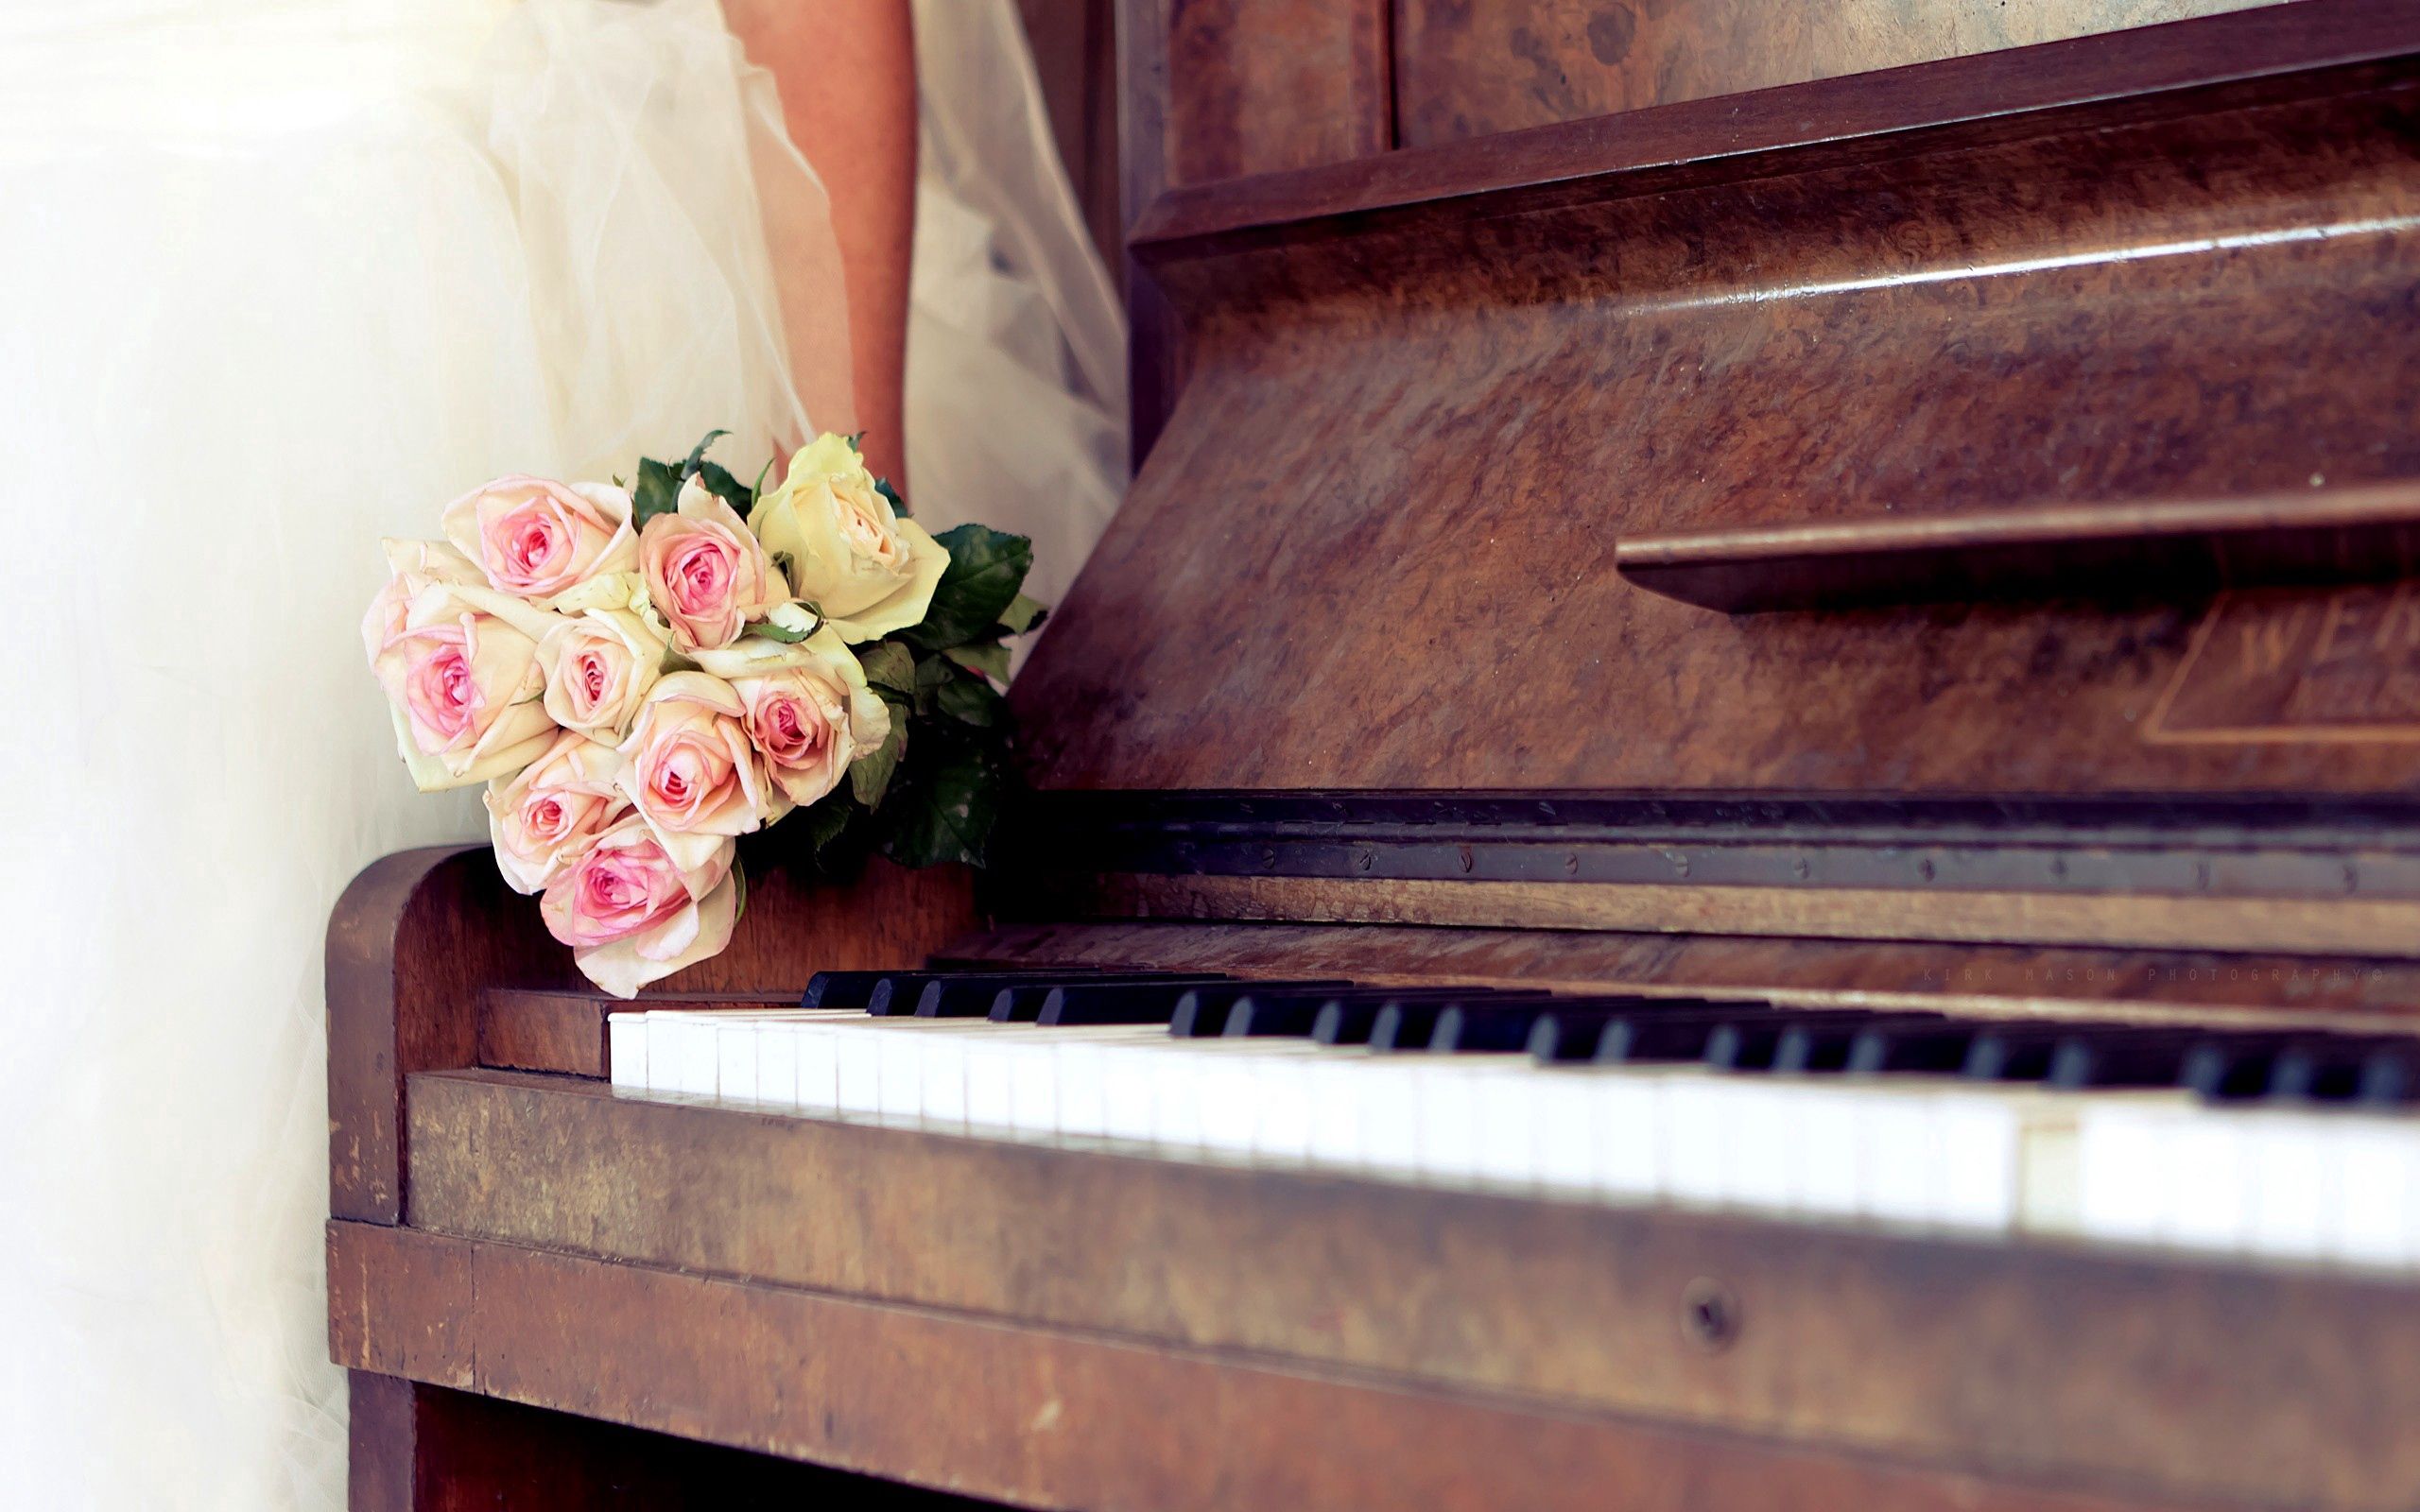 music, flowers, roses, piano, bouquet, bride for Windows